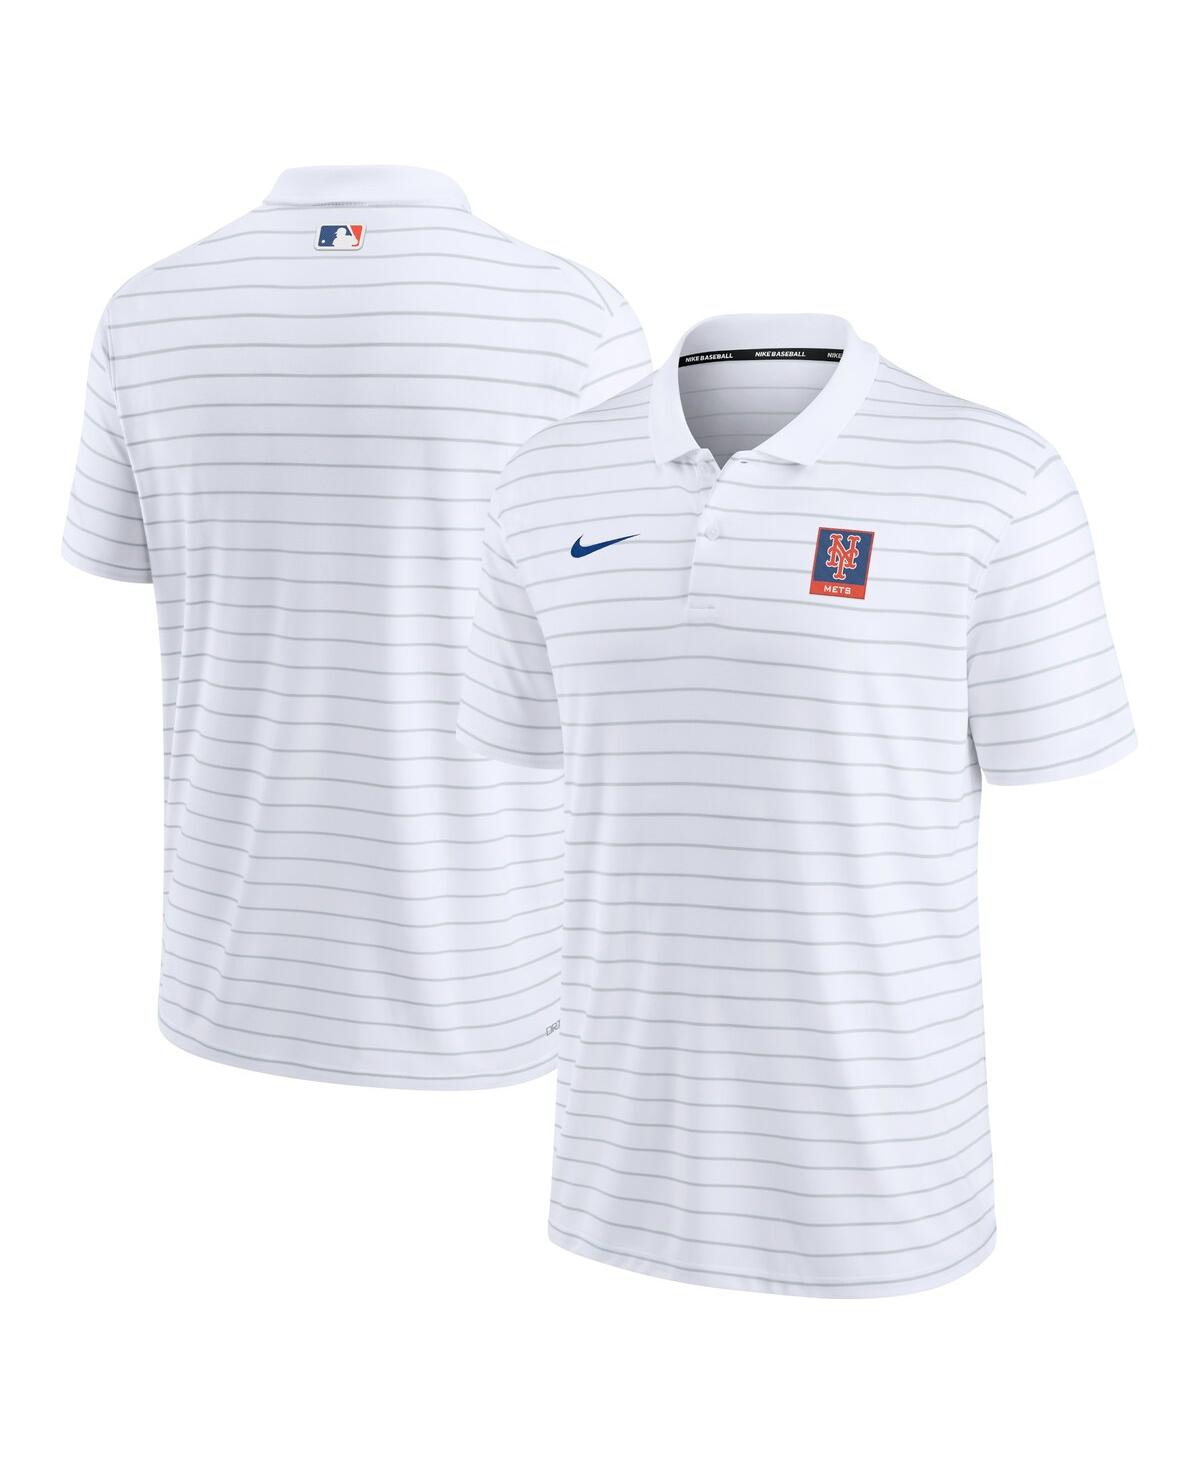 Shop Nike Men's  White New York Mets Authentic Collection Striped Performance Pique Polo Shirt